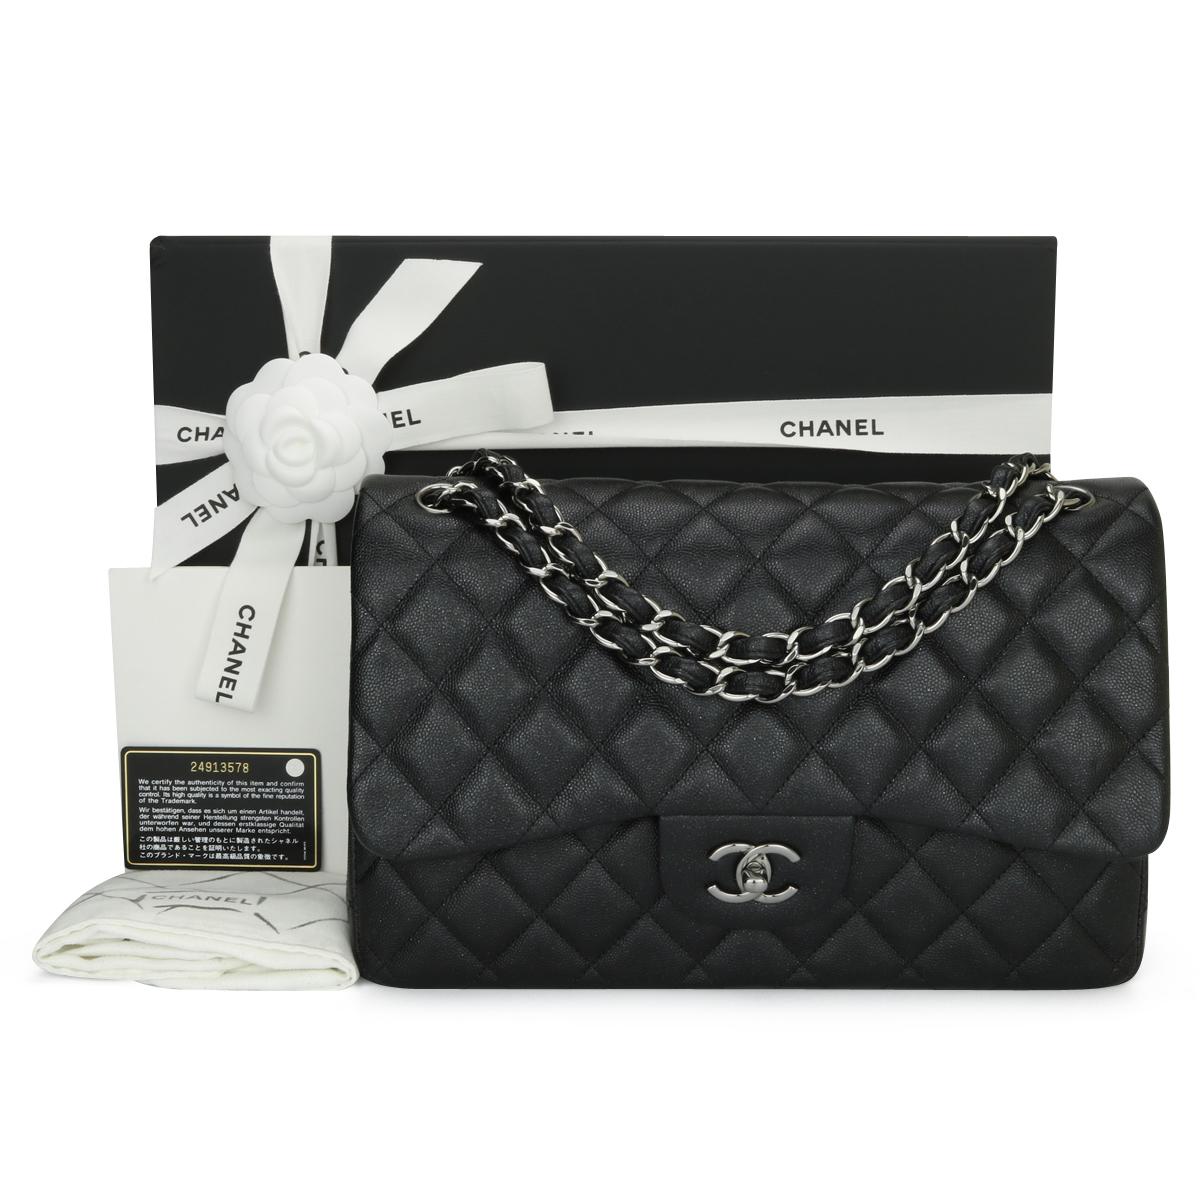 CHANEL Classic Double Flap Jumbo Bag Black Iridescent Caviar with Light Gunmetal Hardware 2018 Super Rare!

This stunning bag is in mint condition, the bag still holds its original shape, and the hardware is still very shiny.

- Exterior Condition: